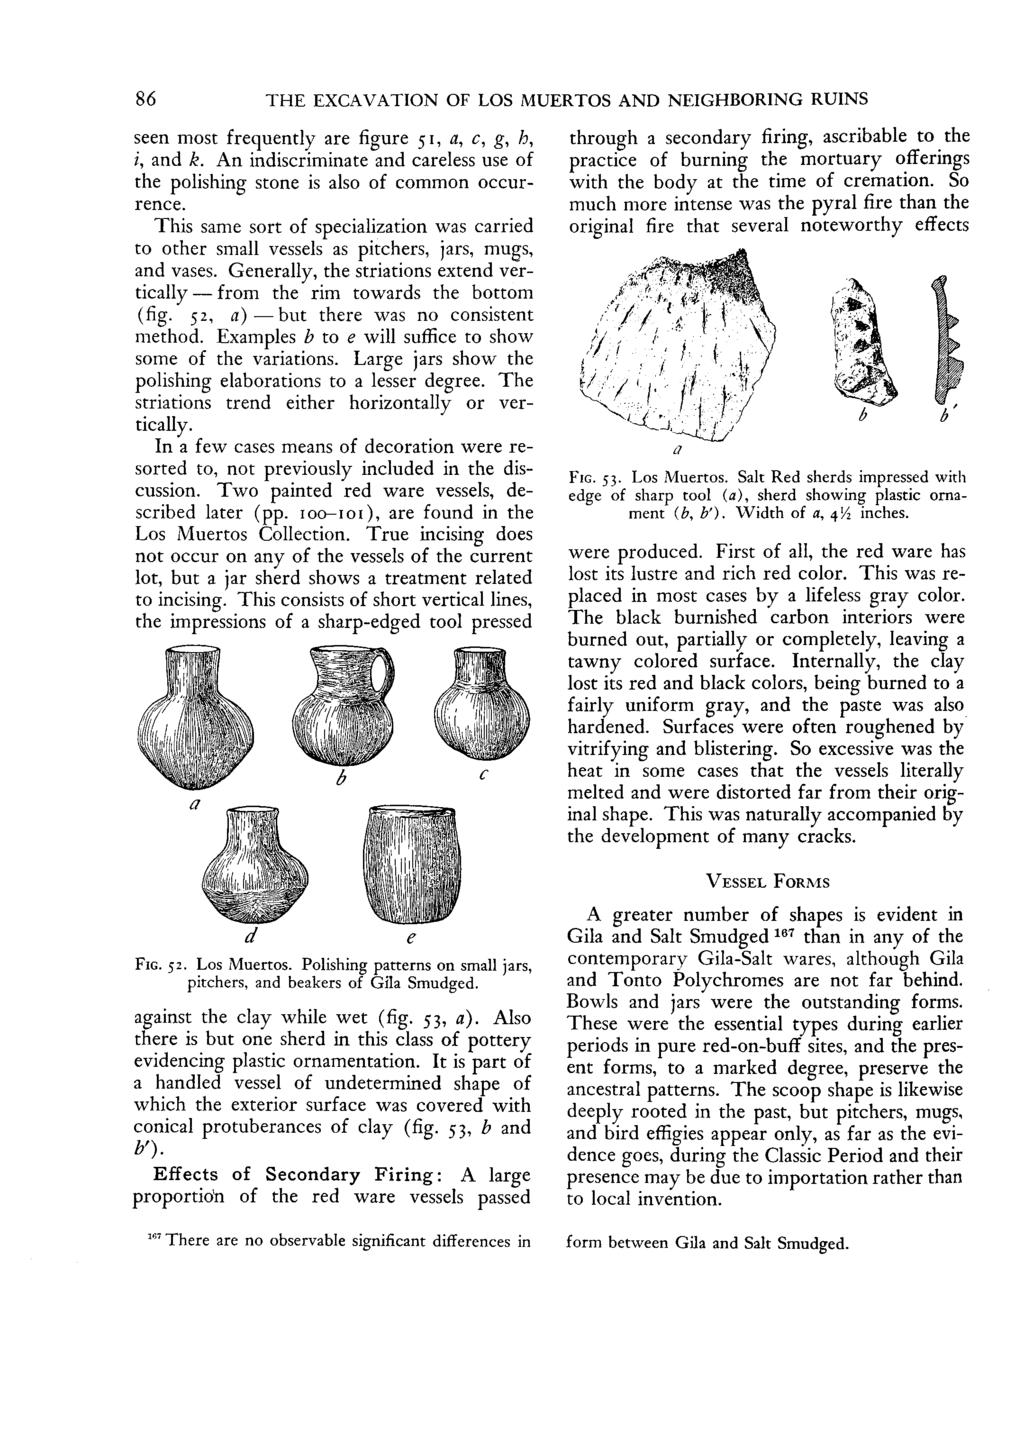 86 THE EXCAVATION OF LOS MUERTOS AND NEIGHBORING RUINS seen most frequently are figure 51, a, c, g, h, i, and k. An indiscriminate and careless use of the polishing stone is also of common occurrence.